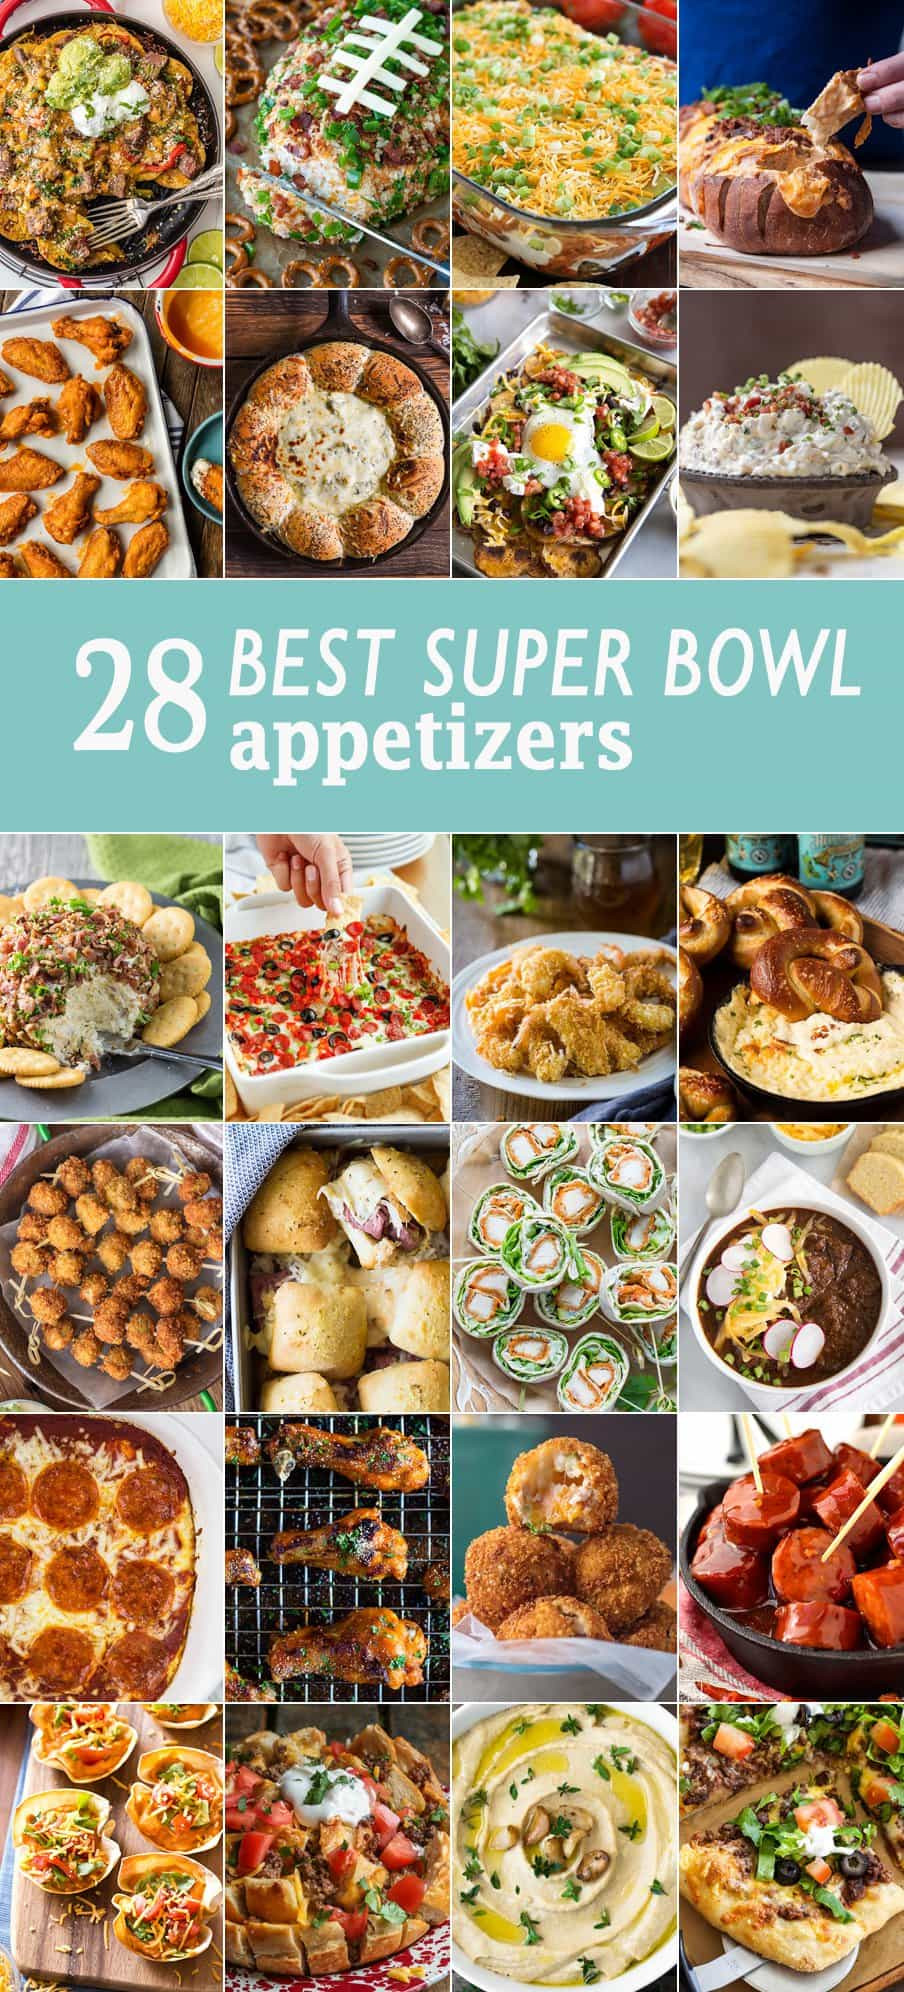 Super Bowl Snacks Recipe
 10 Best Super Bowl Appetizers The Cookie Rookie